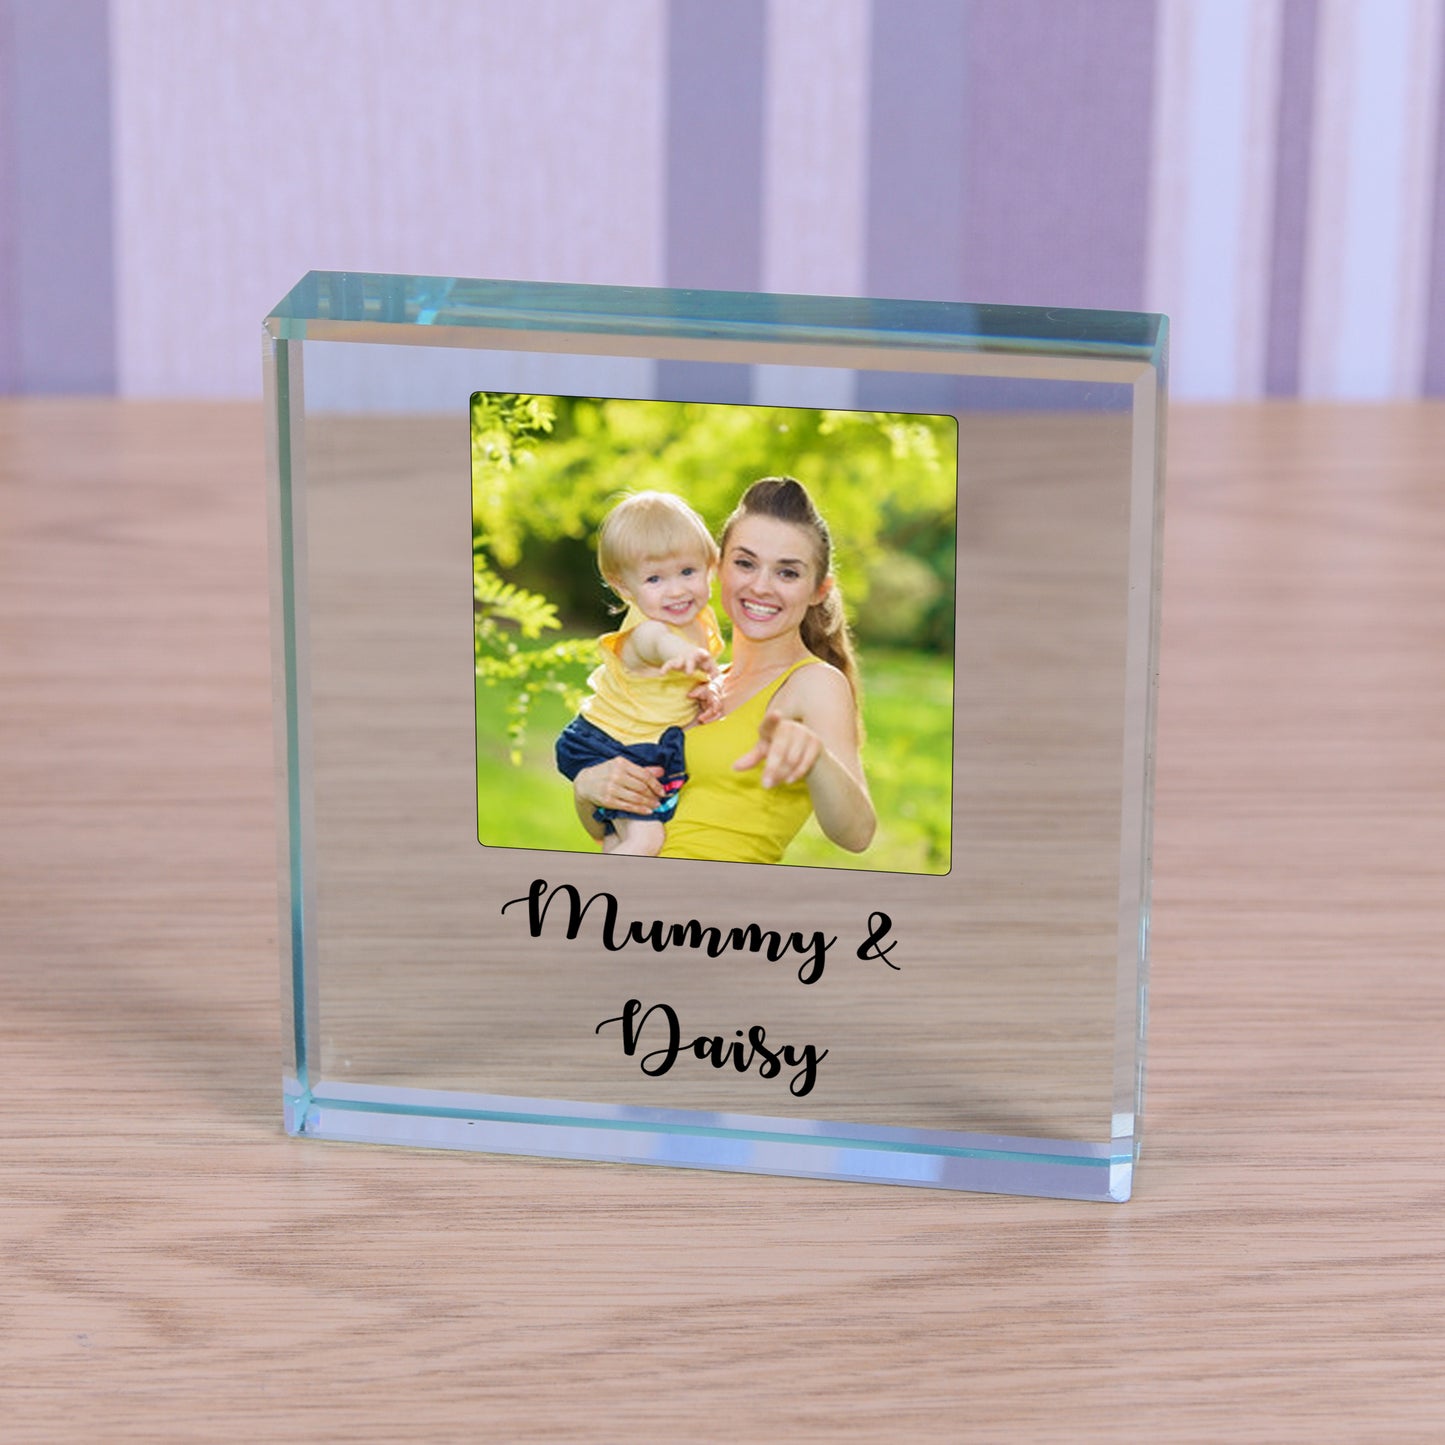 Mummy And Me Photo Block Frame - Personalised